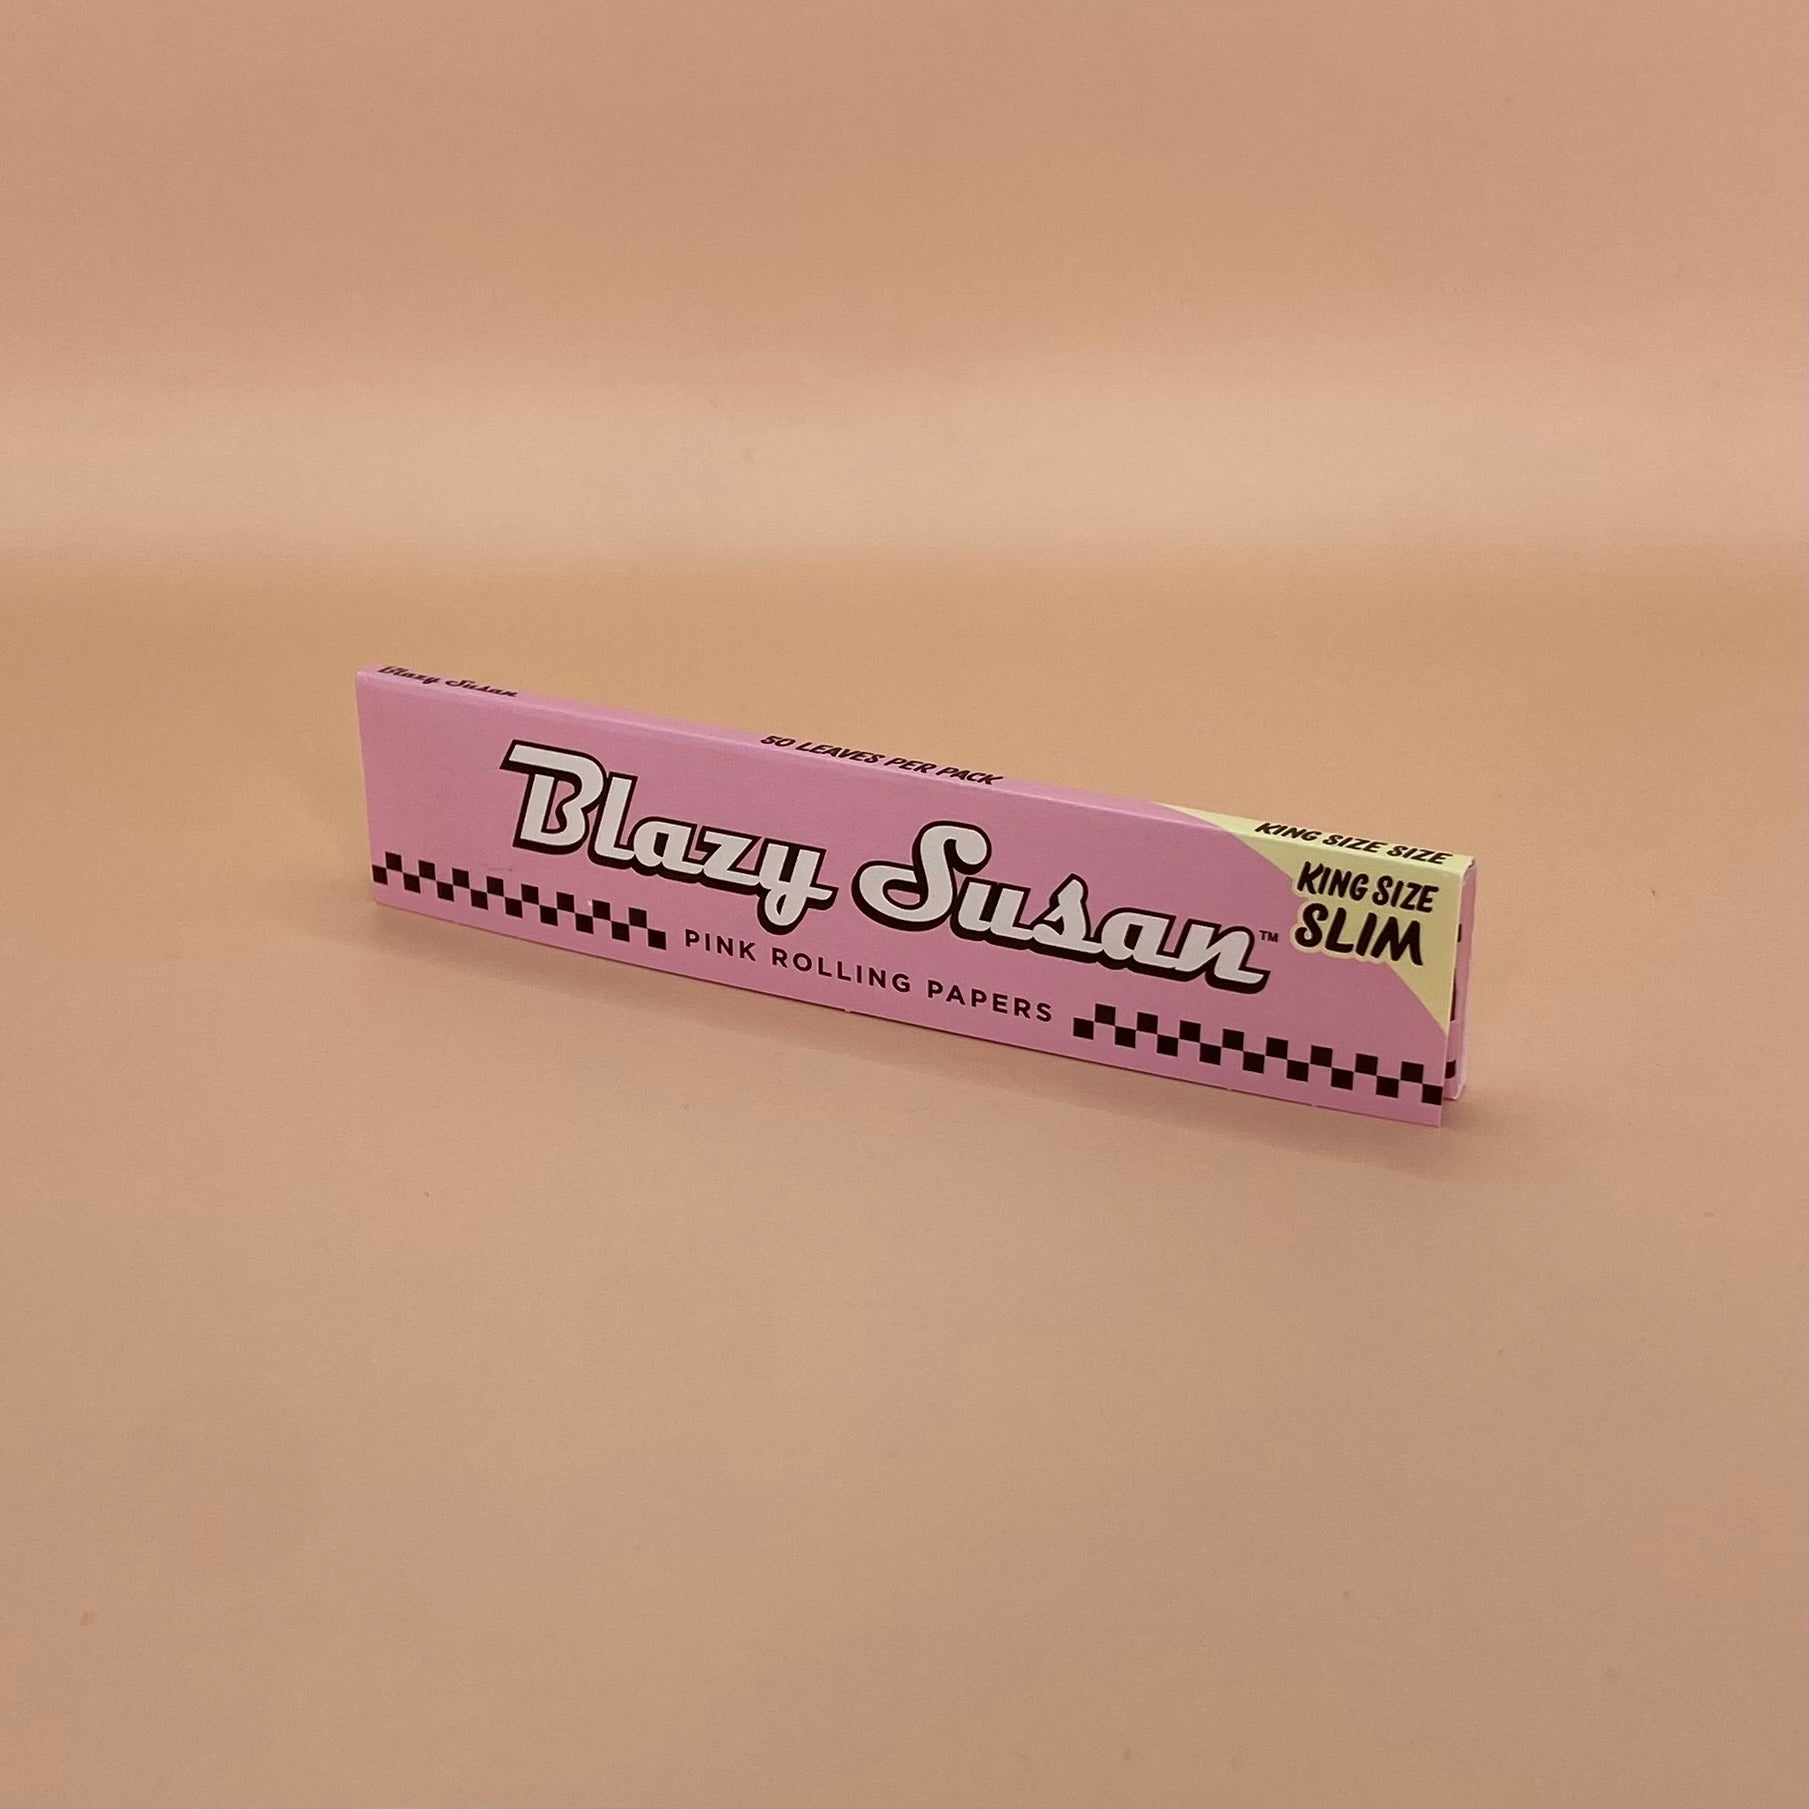 Pink Blazy Susan Rolling Papers - King Size